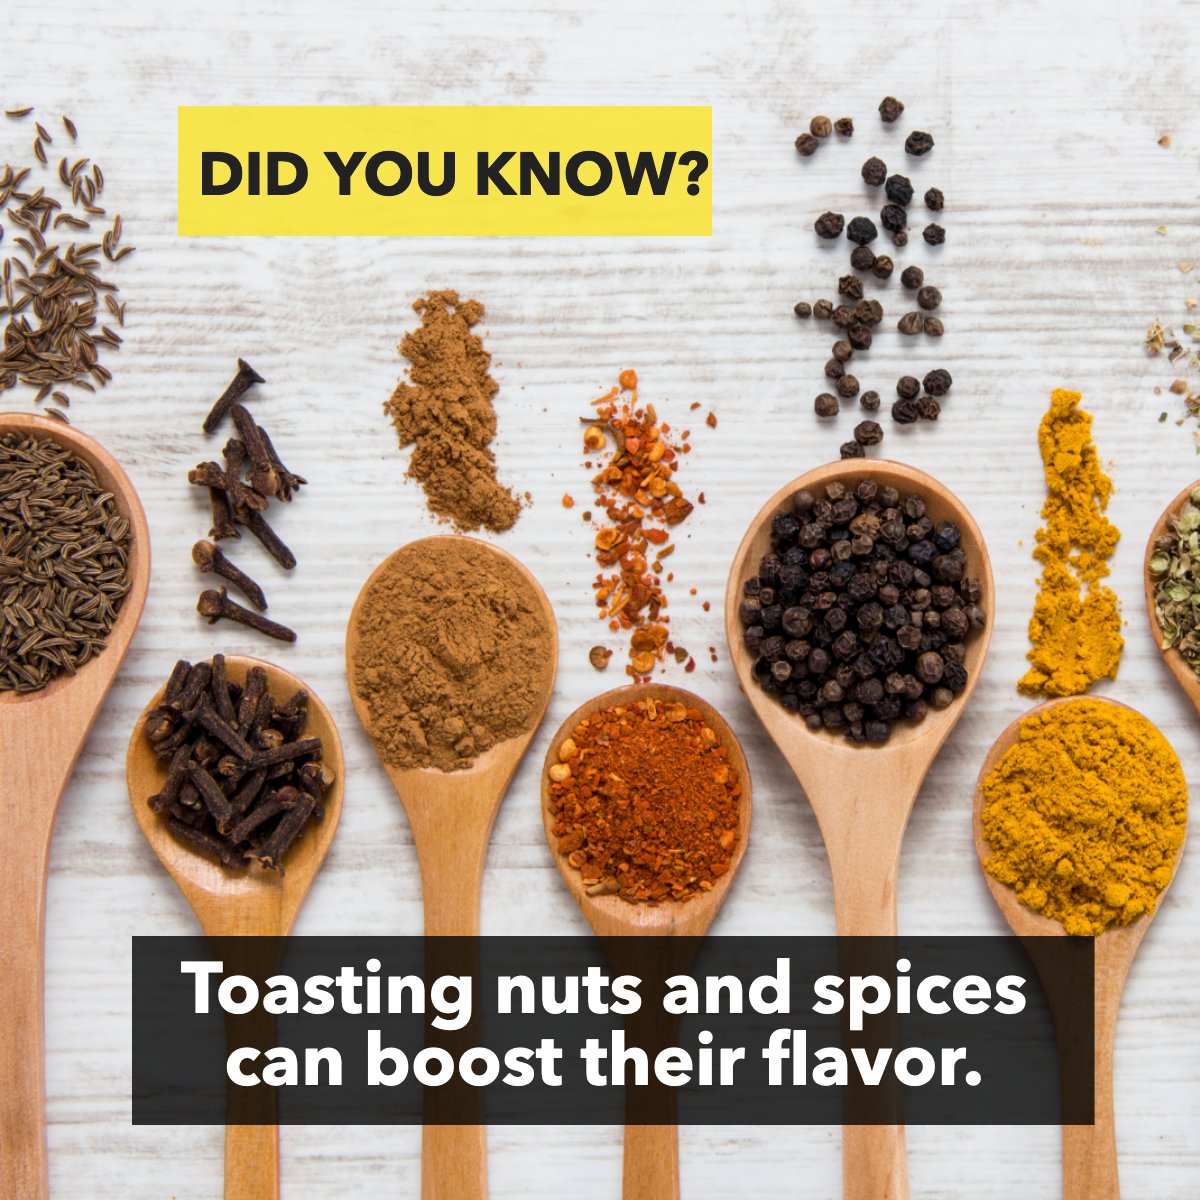 All the foodies in the house, raise your hand!

Did you know? Toasting nuts and spices 🌶 can boost their flavor.

Do you know any cooking secrets? Share them below. 

Go on. You know you want to. 

#kitchen #cooking #kitchenhacks #cookingtips #woodenspoons